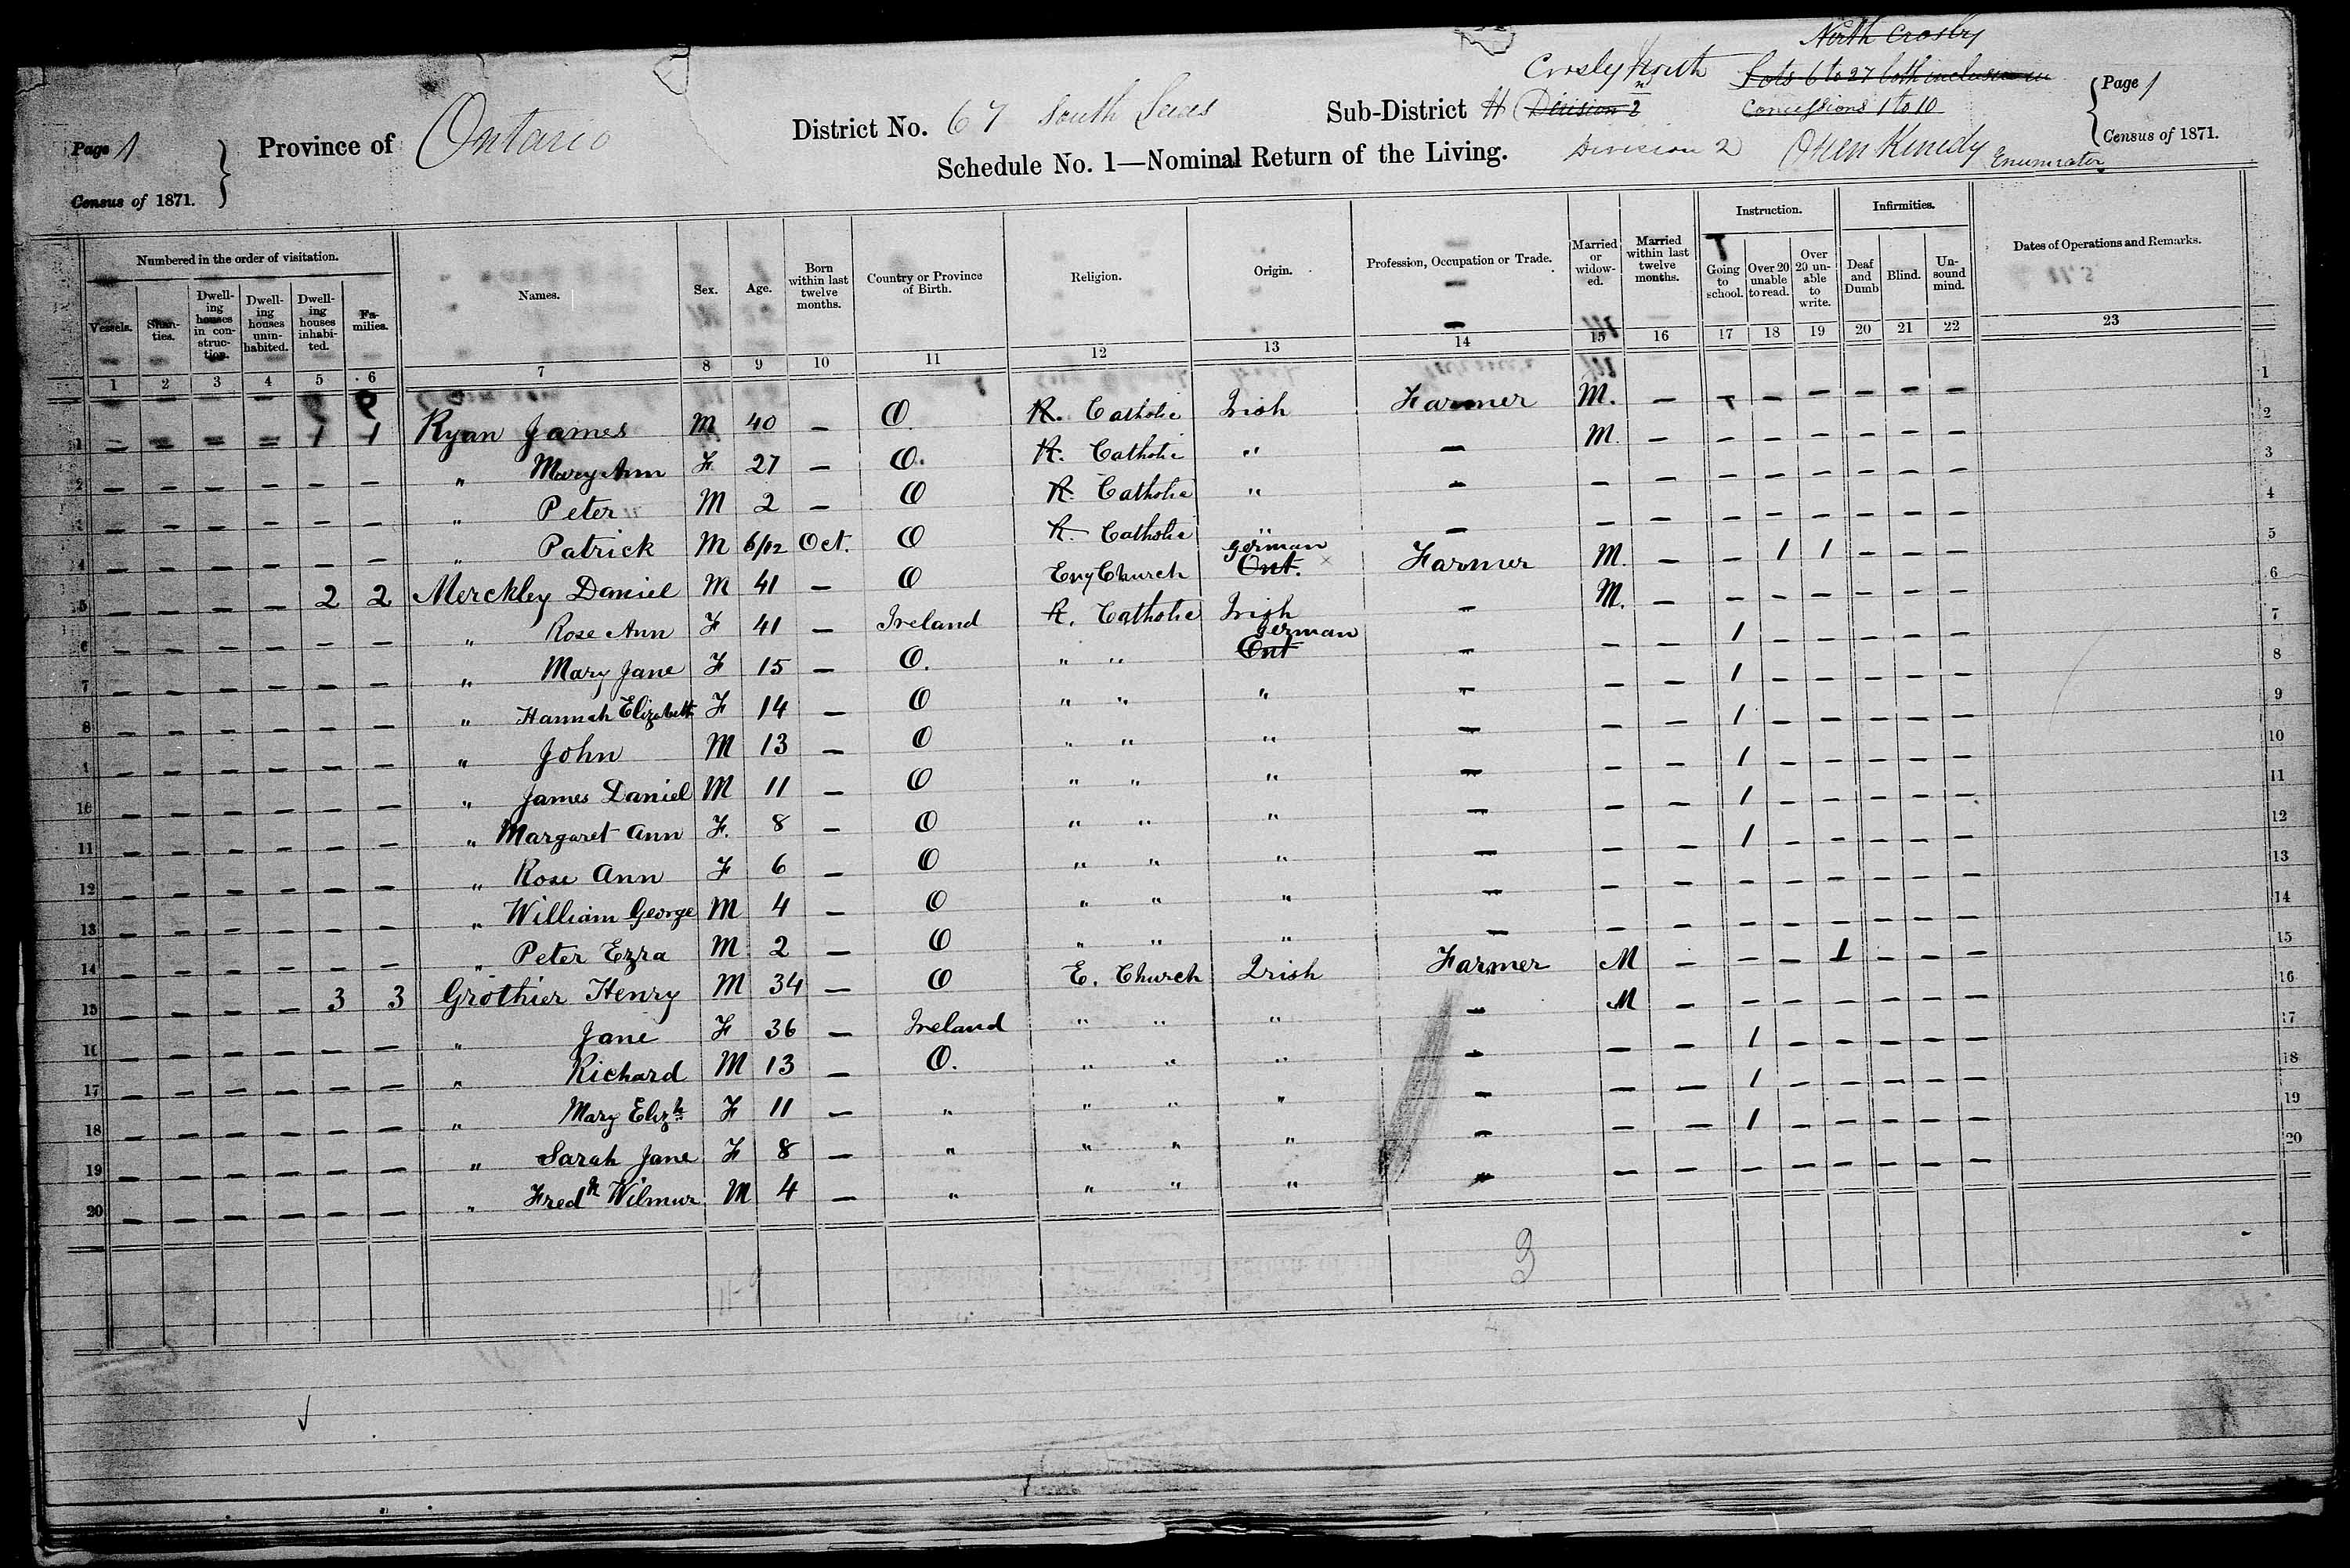 Title: Census of Canada, 1871 - Mikan Number: 142105 - Microform: c-10002